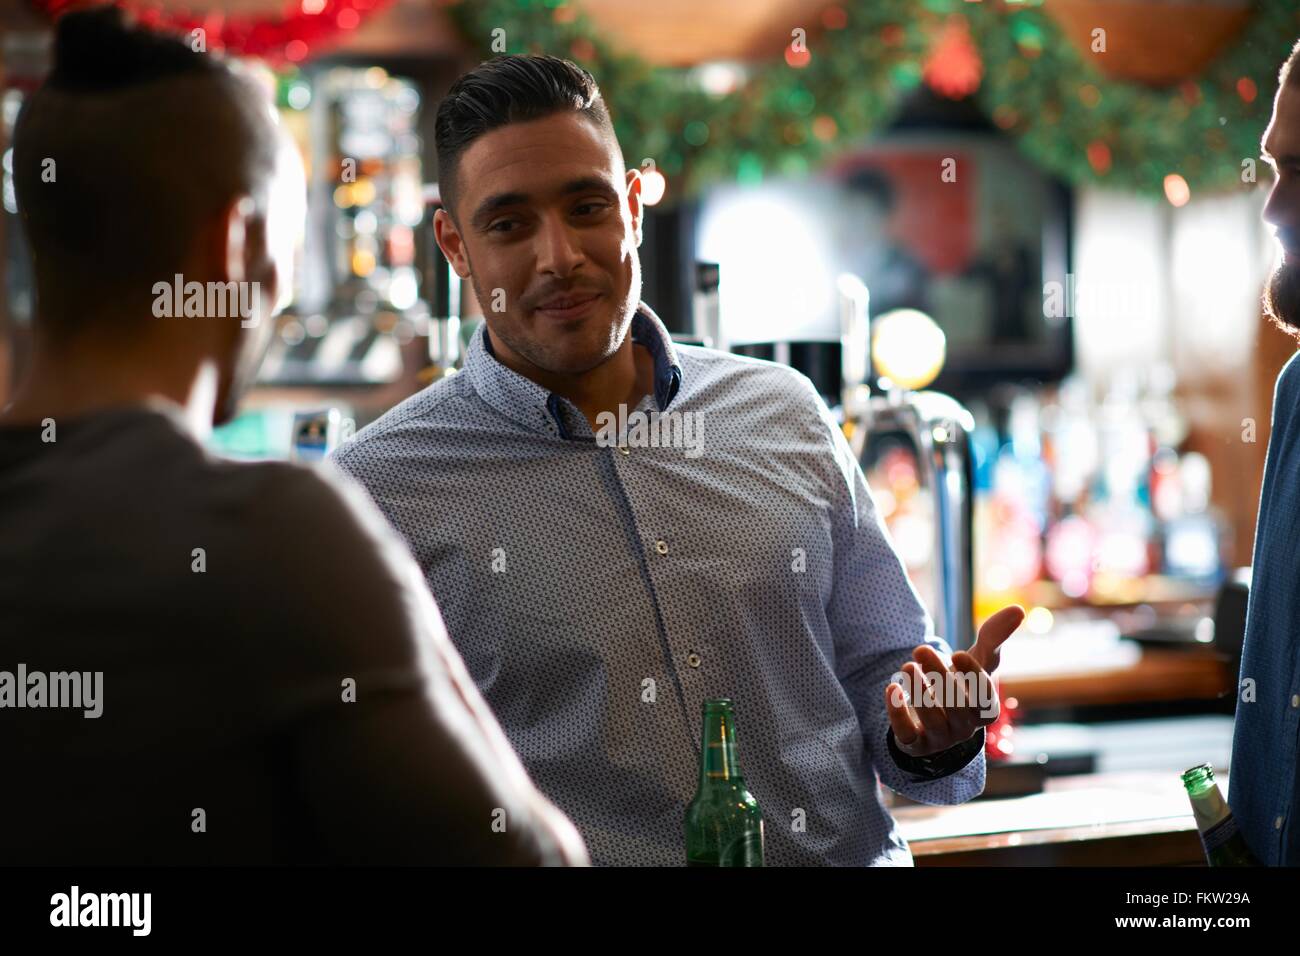 Man leaning against counter in public house talking to friend Stock Photo